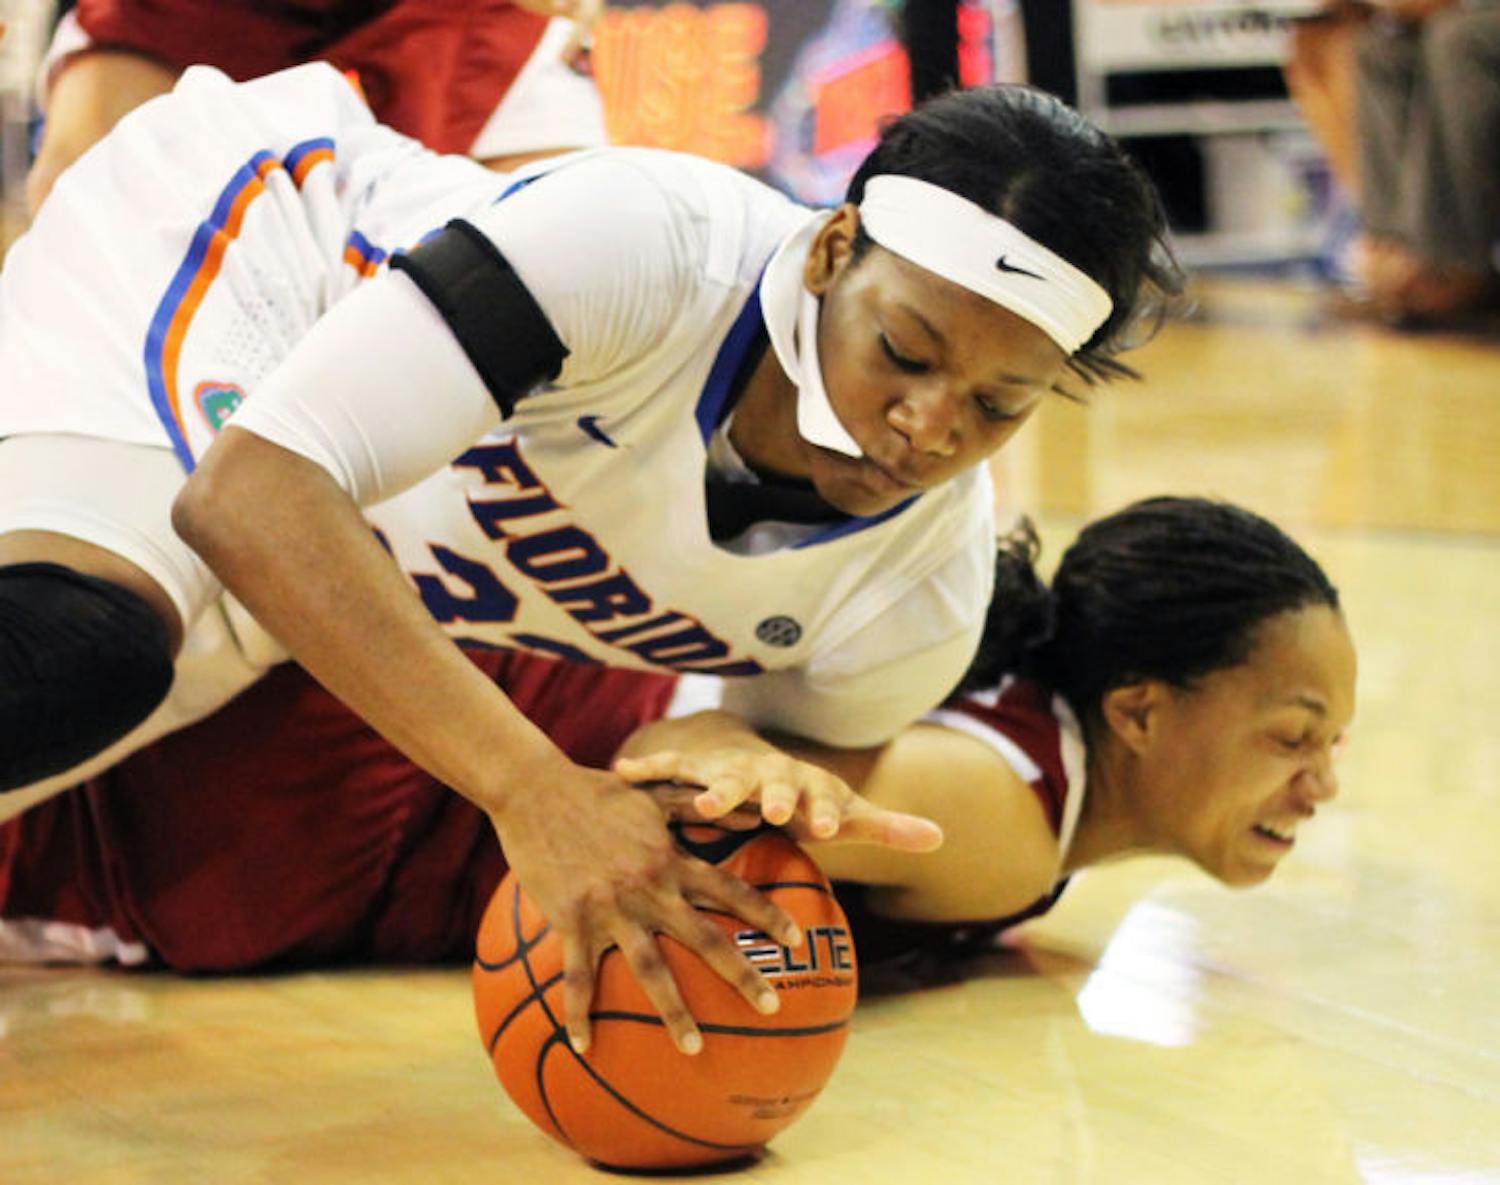 Forward Jennifer George dives for the ball during Florida’s 69-58 loss to Arkansas on Feb. 28 in the O’Connell Center. The Indiana Fever selected George with the 33rd overall pick in the 2013 WNBA Draft on Monday.